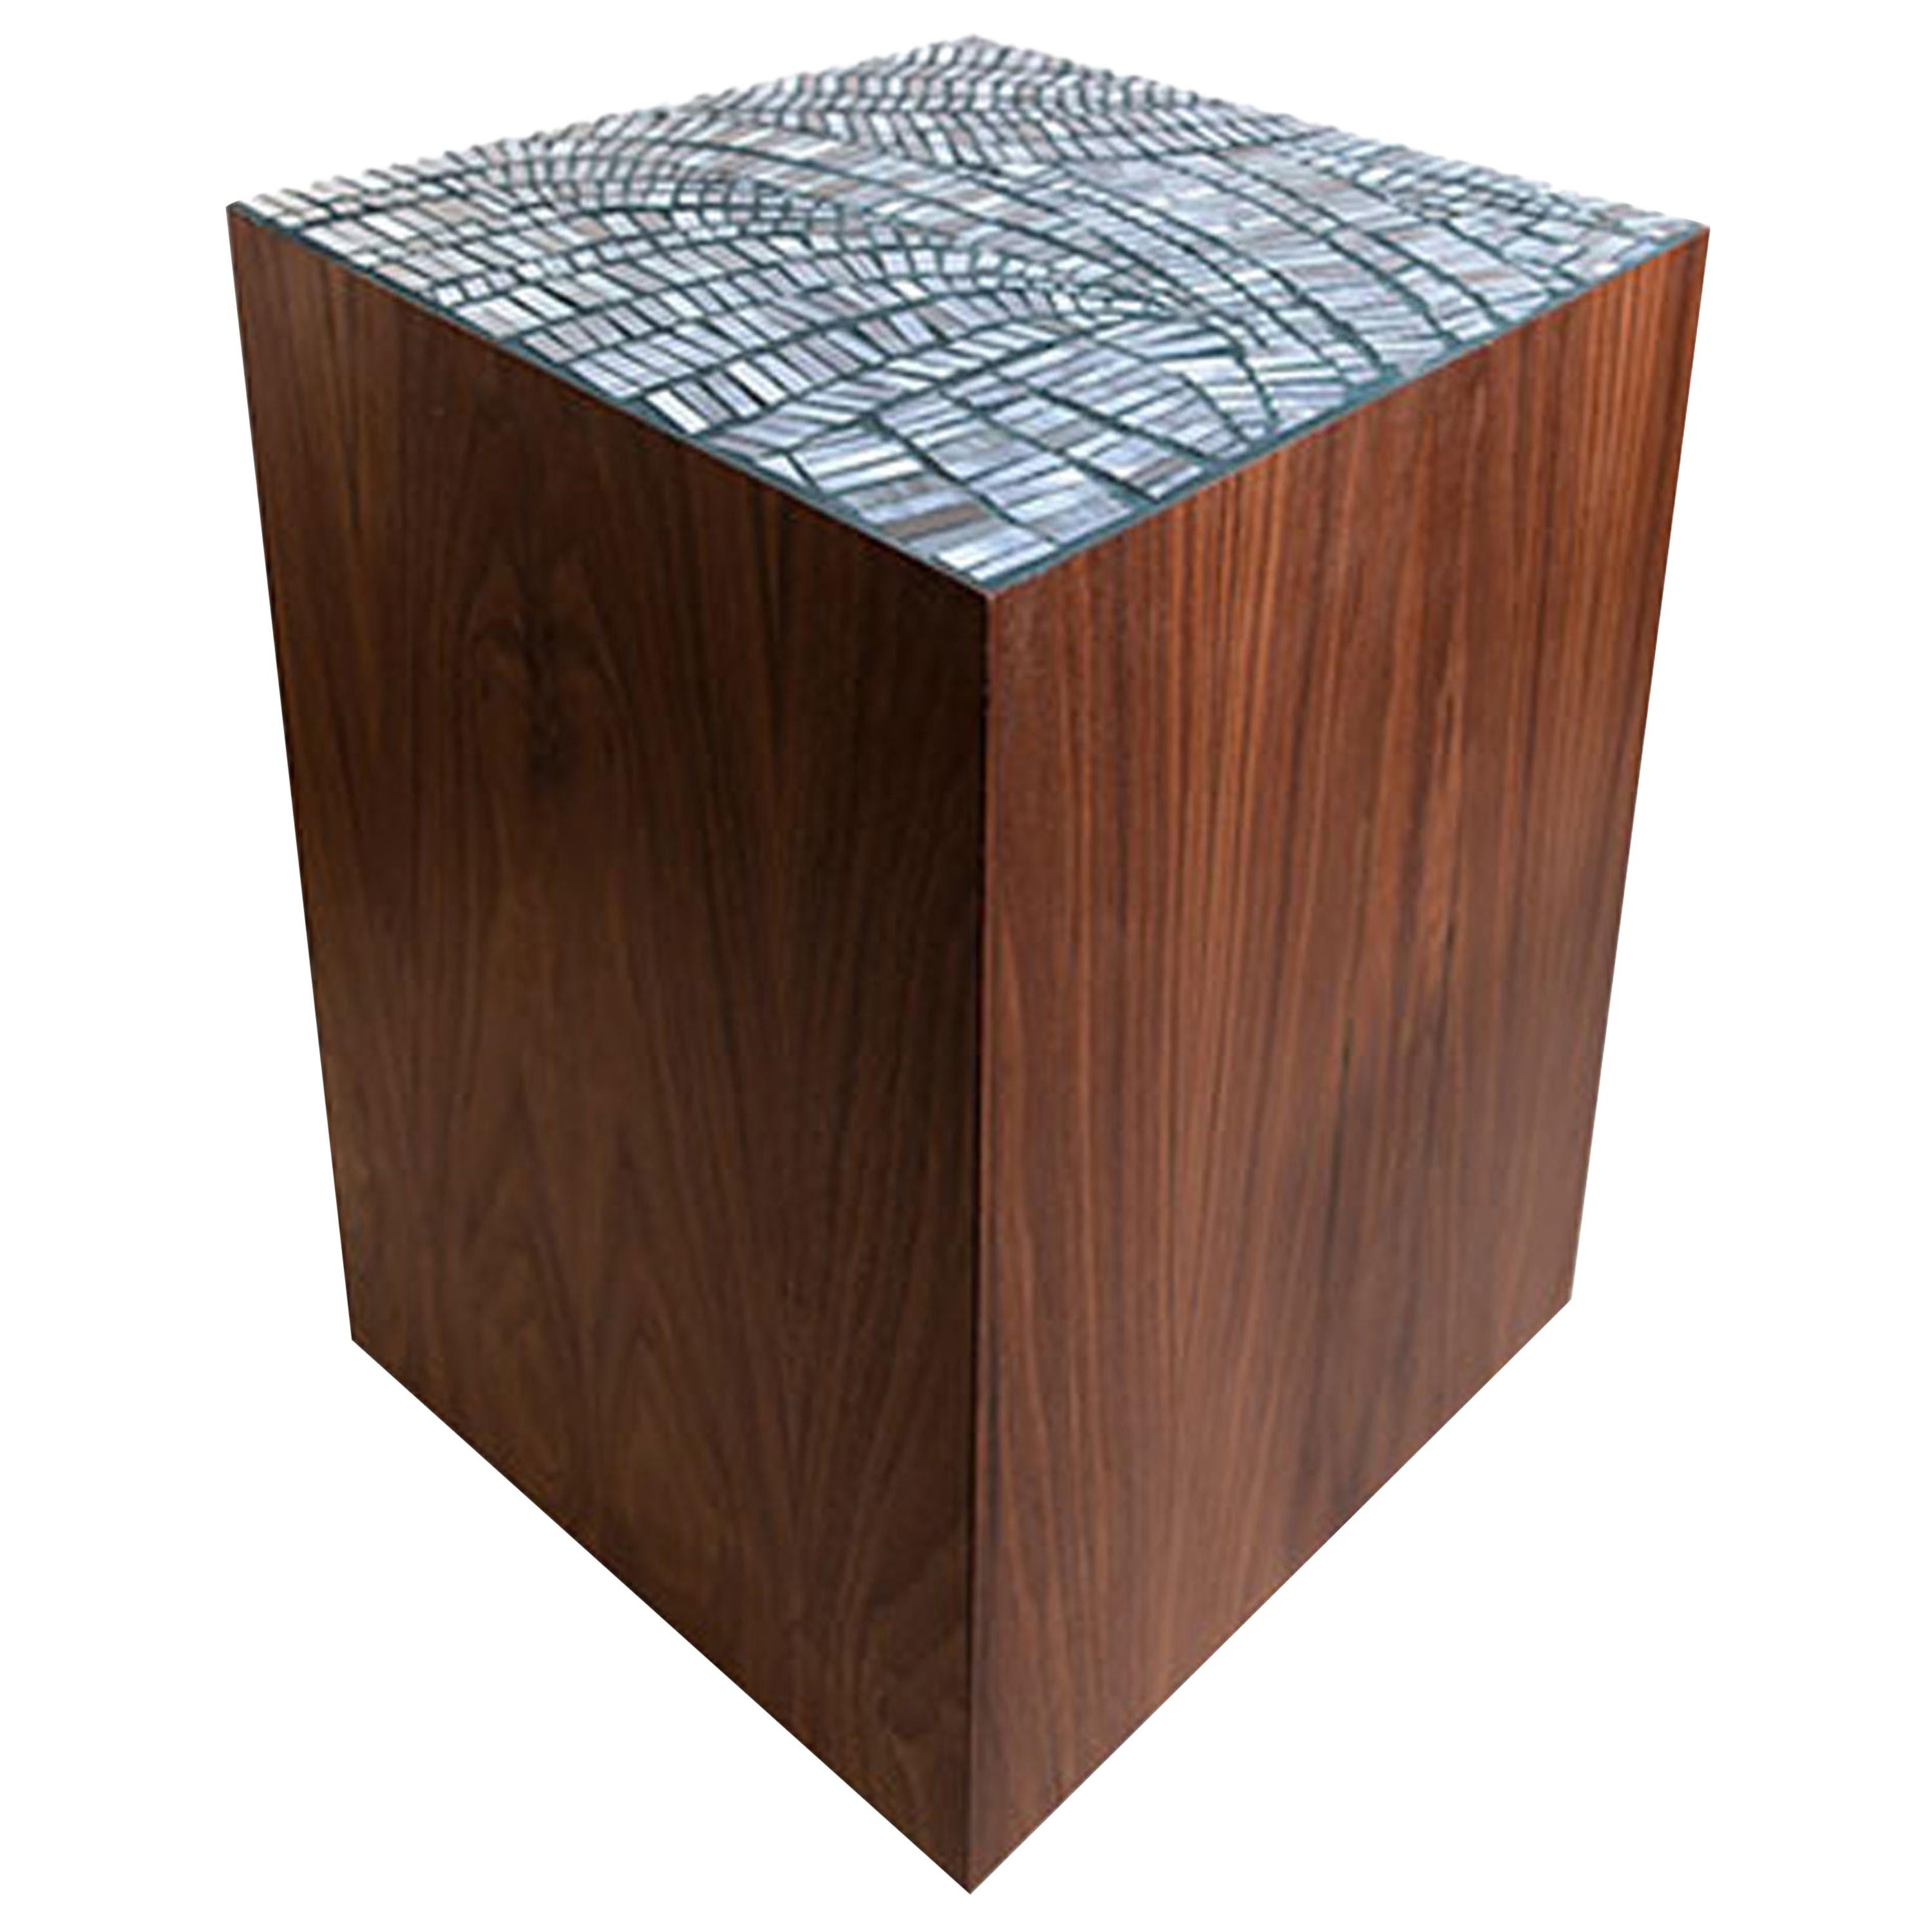 Customizable Natura Brown Walnut Pedestal in Plume Glass Mosaic by Ercole Home